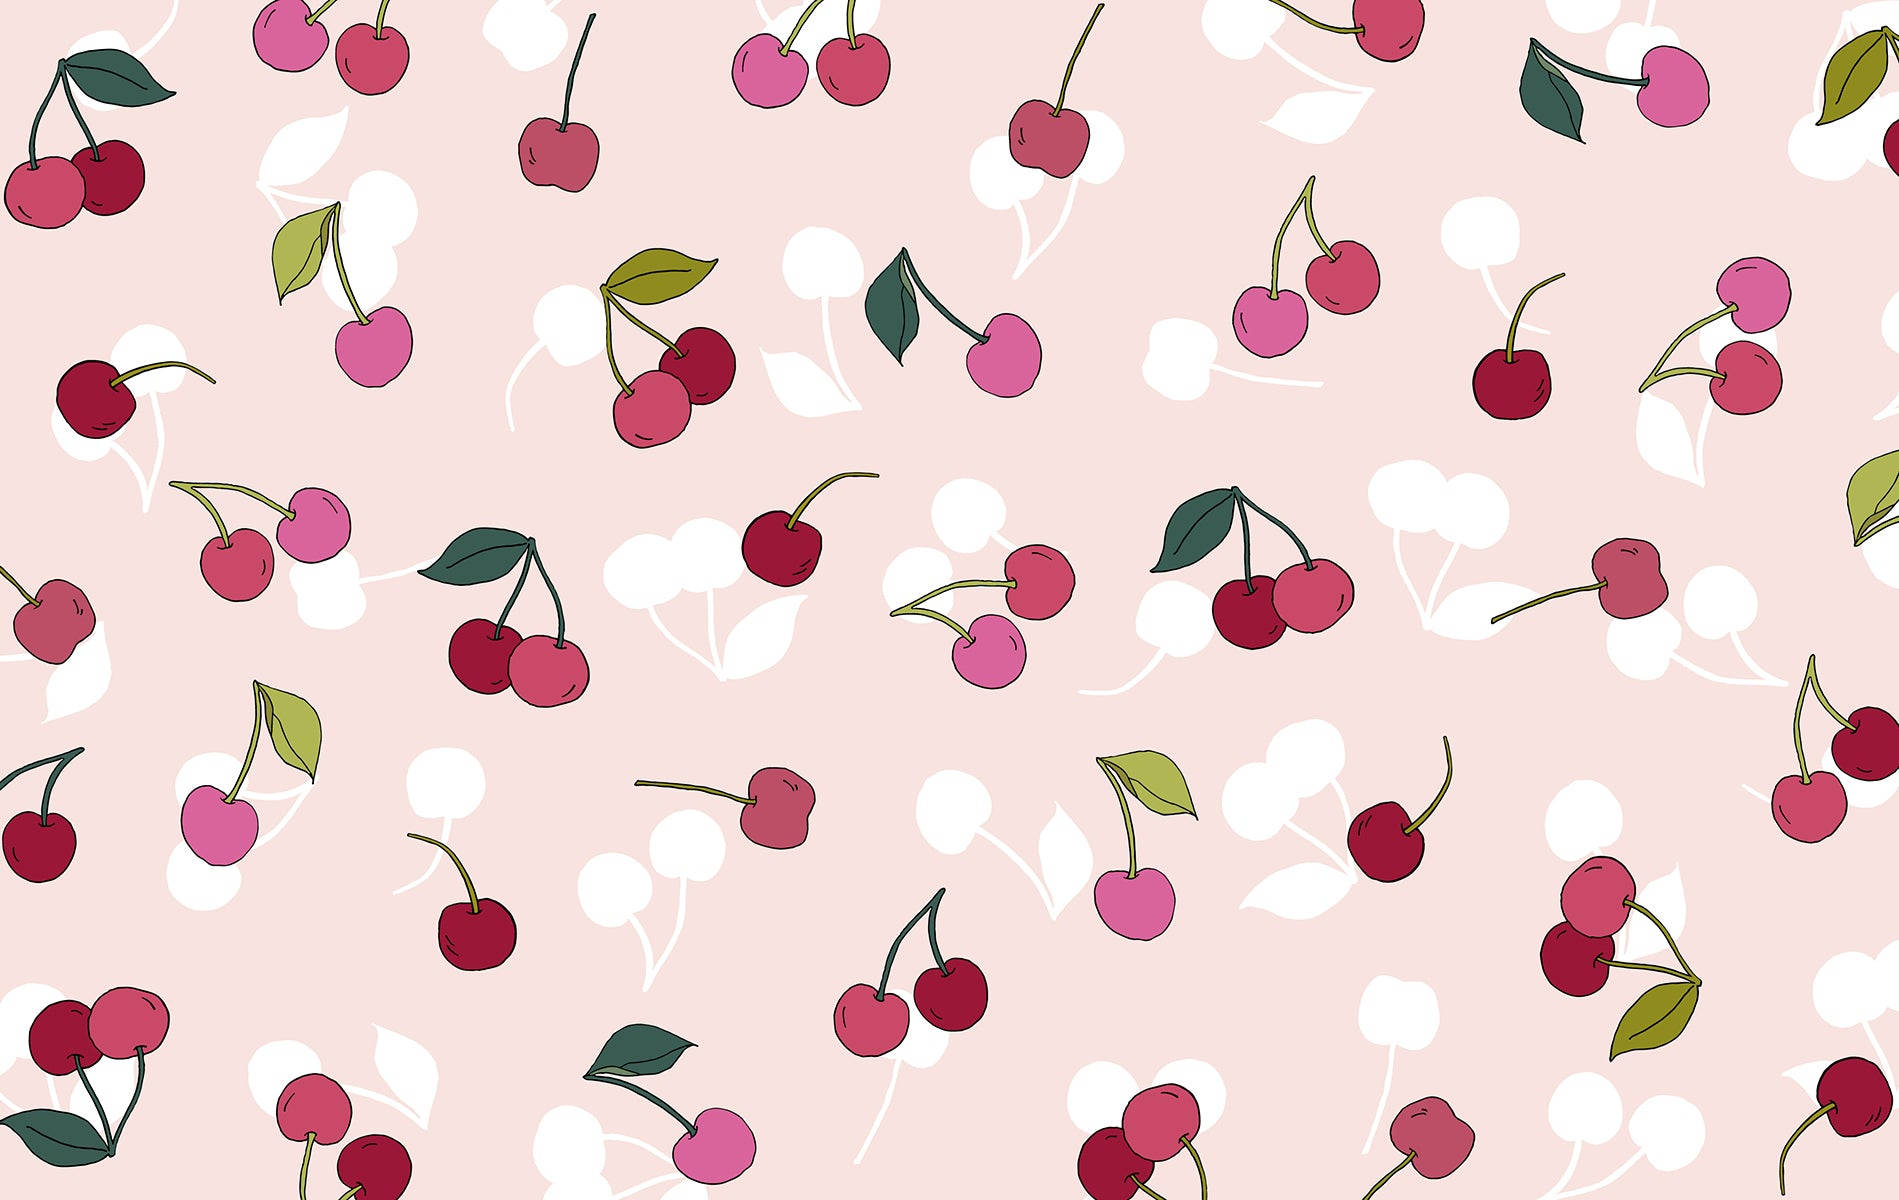 Get a sweet summery feeling with this cute cherry aesthetic! Wallpaper